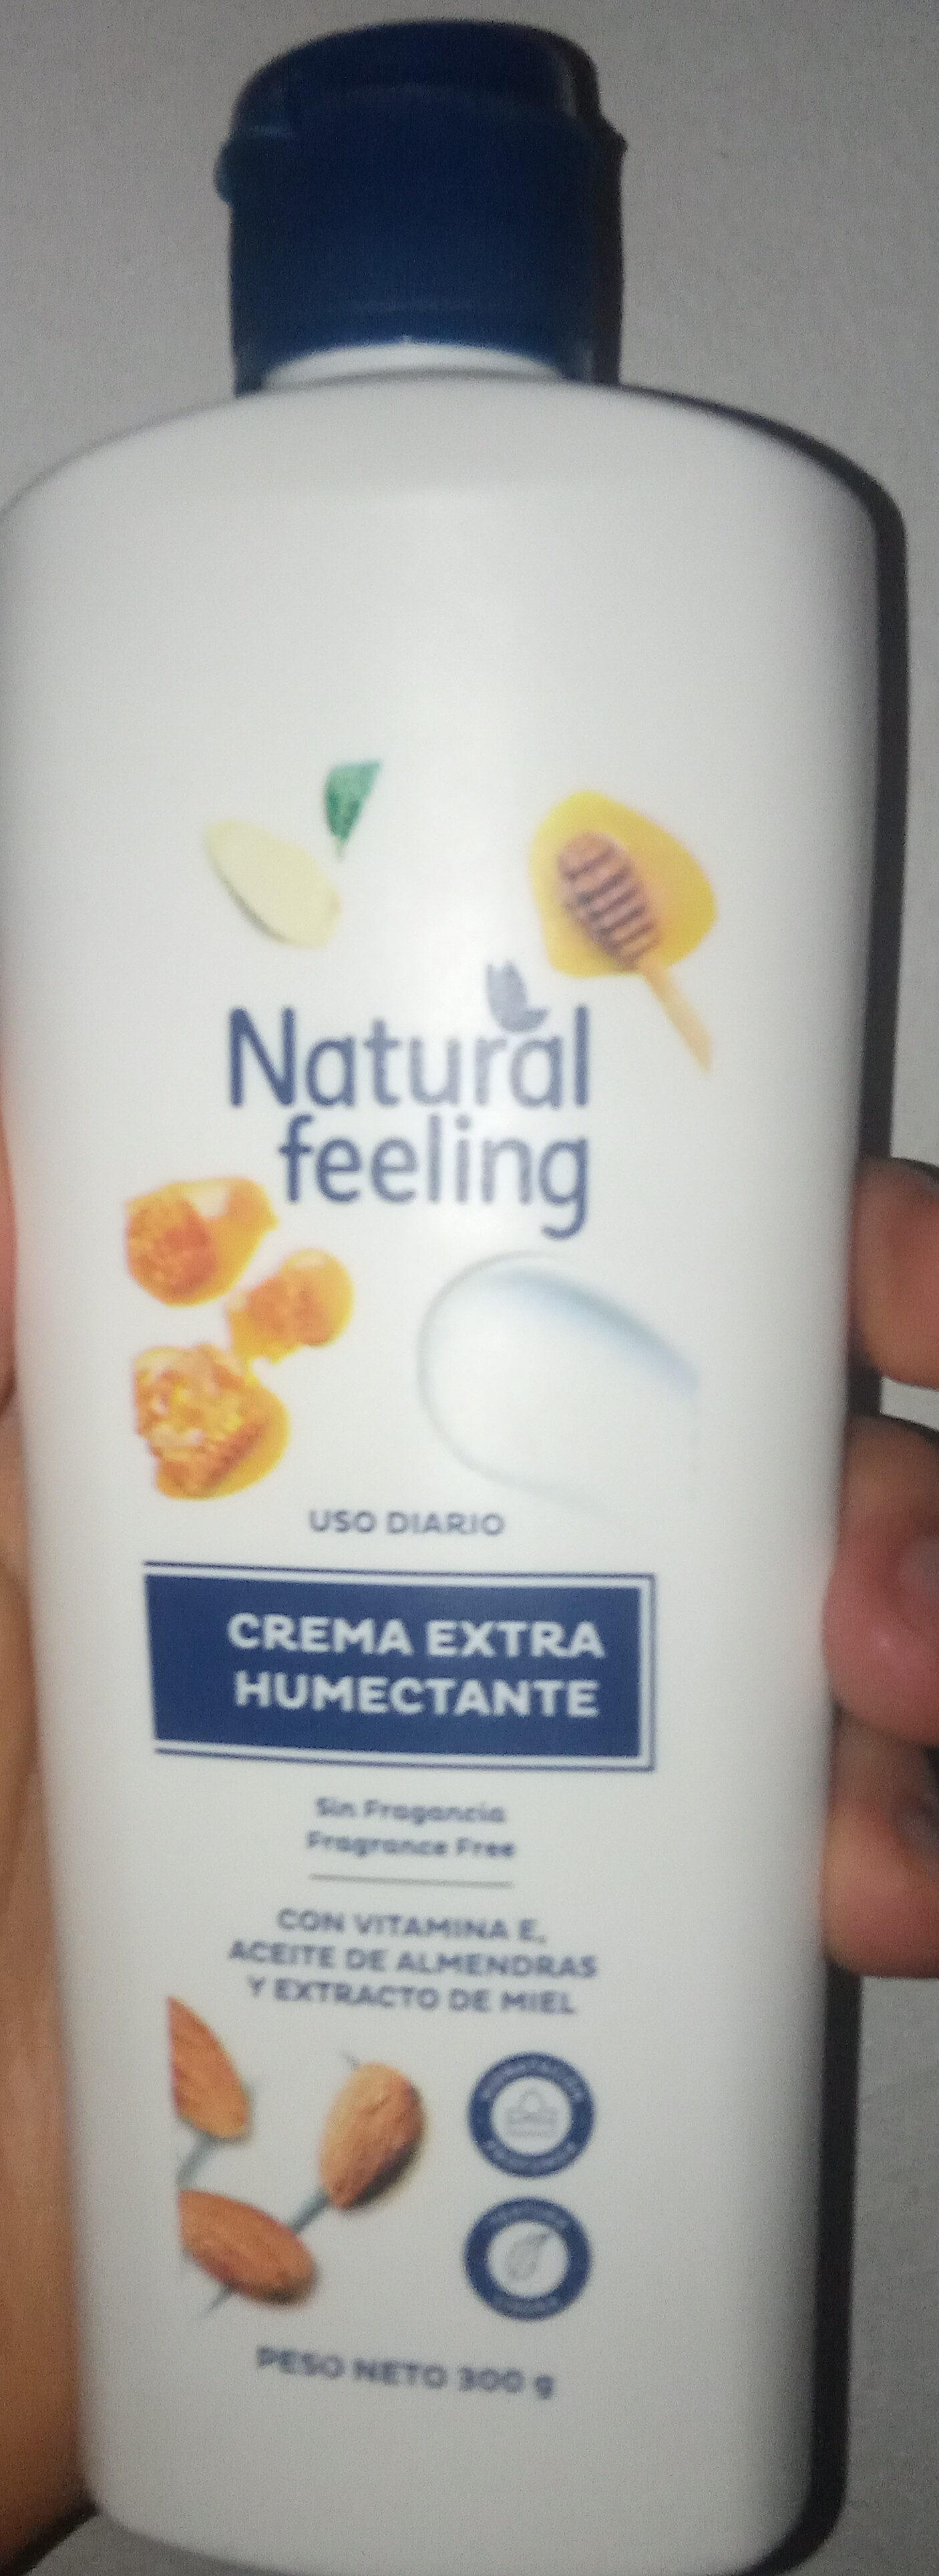 Natural Feeling  Crema Extra Humectante - 300g